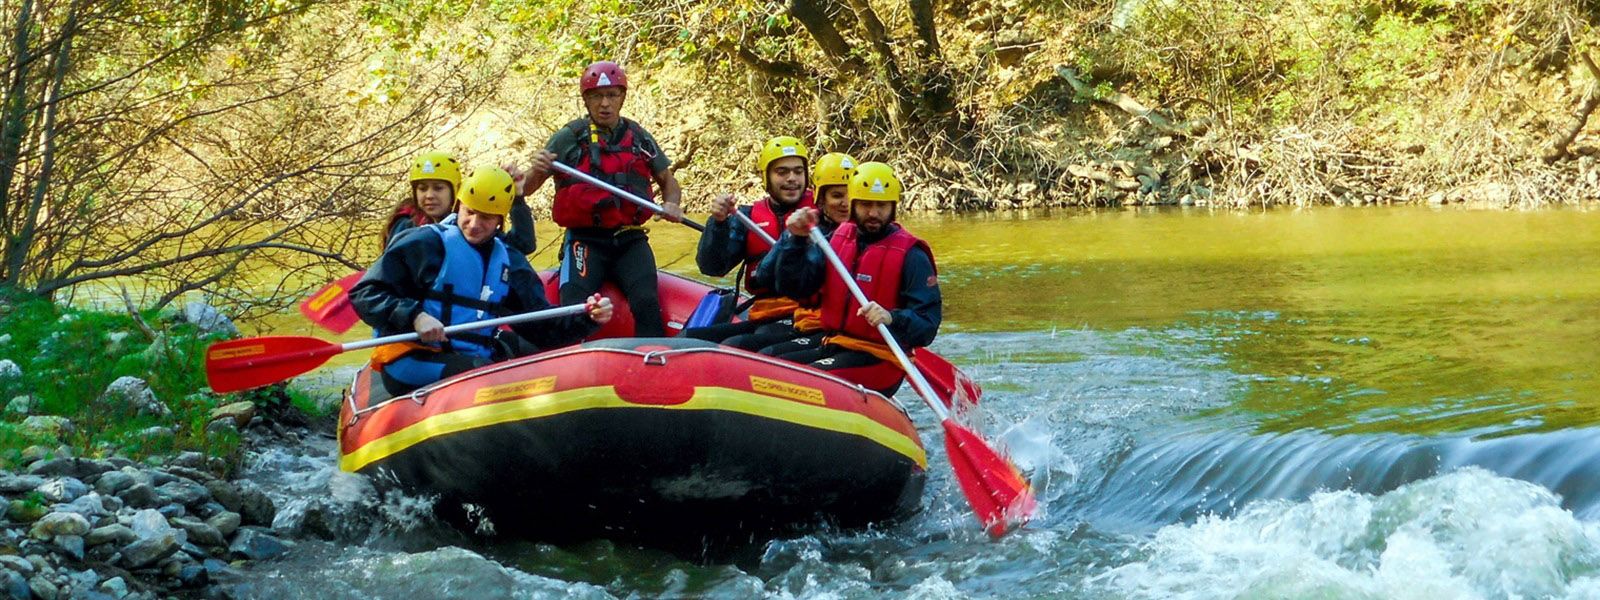 Rafting and Archery in Pineios at the Valley of Tempe, Thessaly